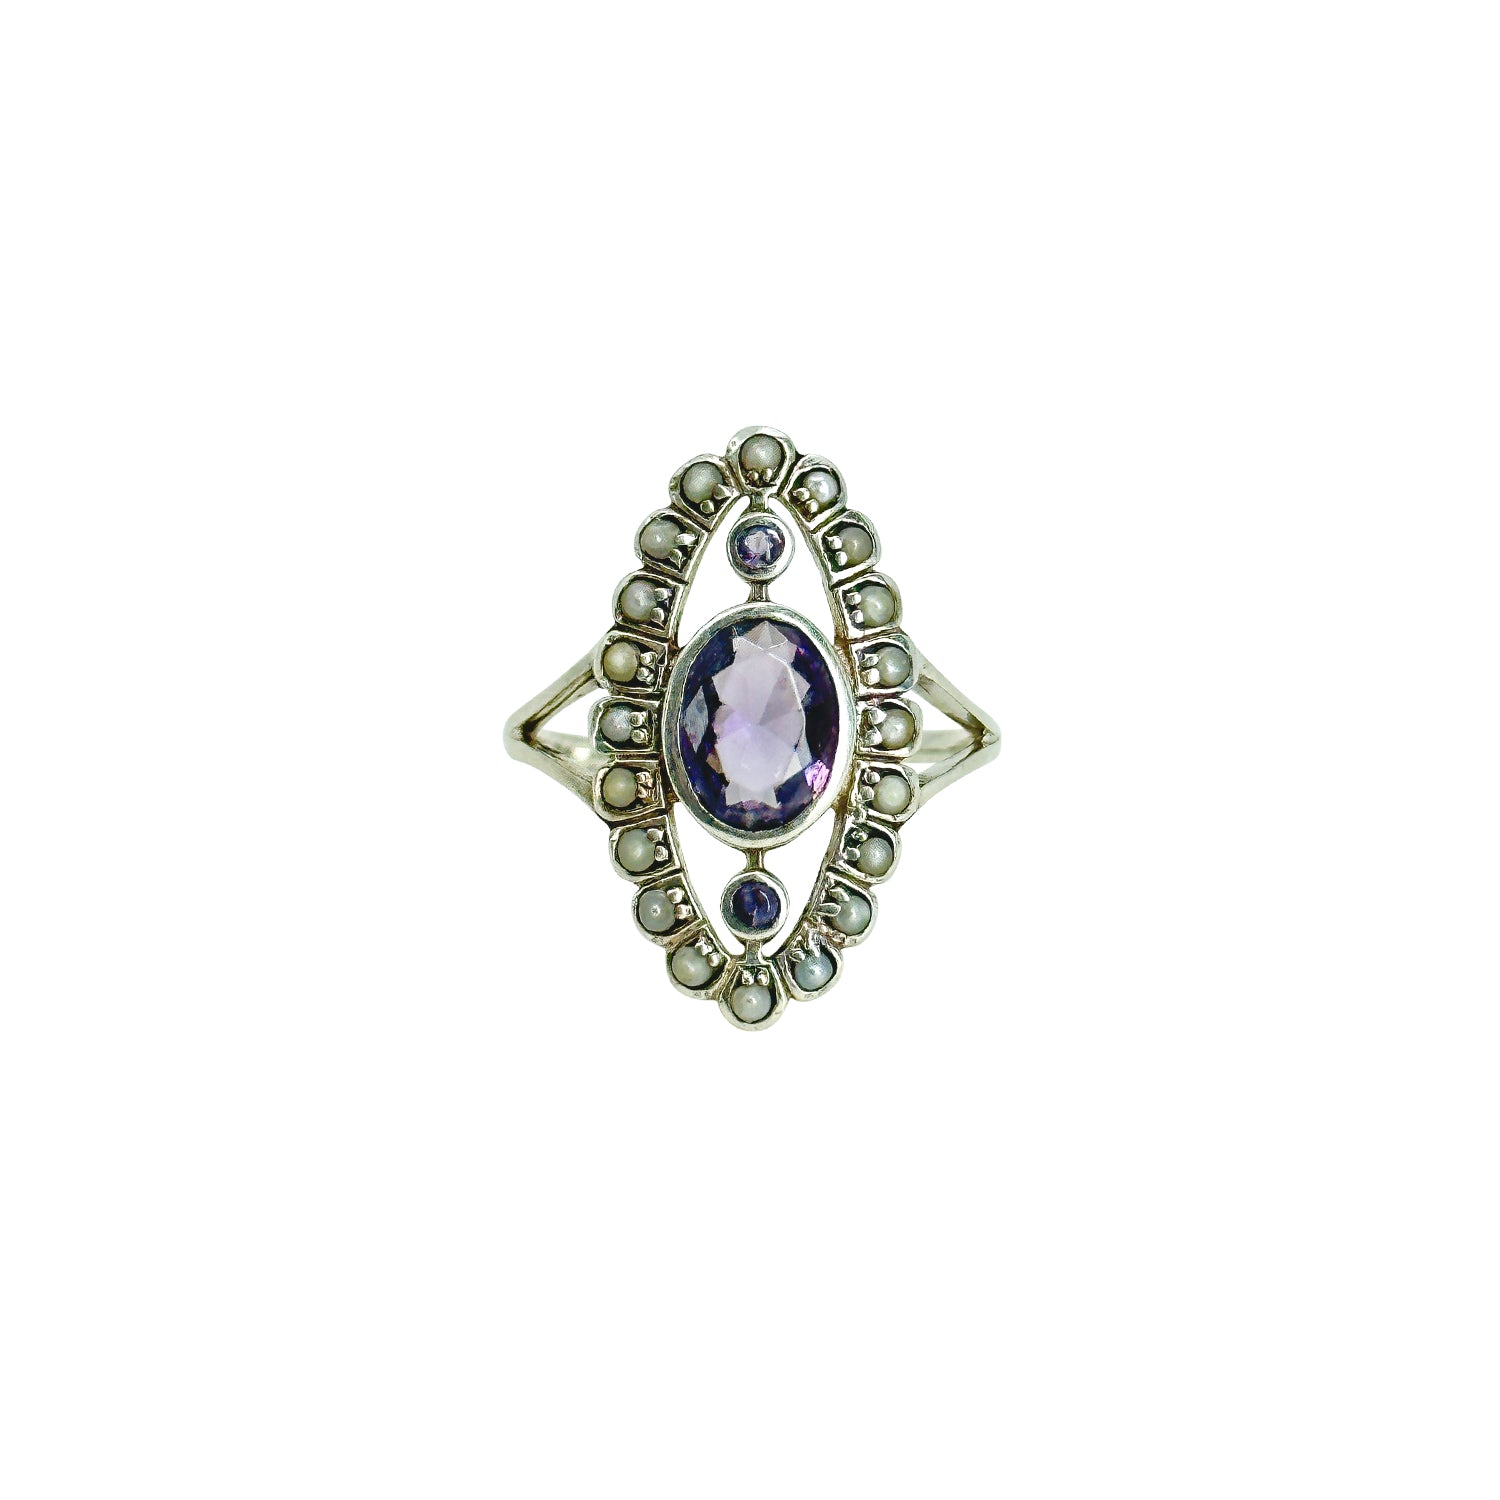 Navette Amethyst Antique Seed Pearl Halo Style Split Shank Ring- Sterling Silver Sz 6.75